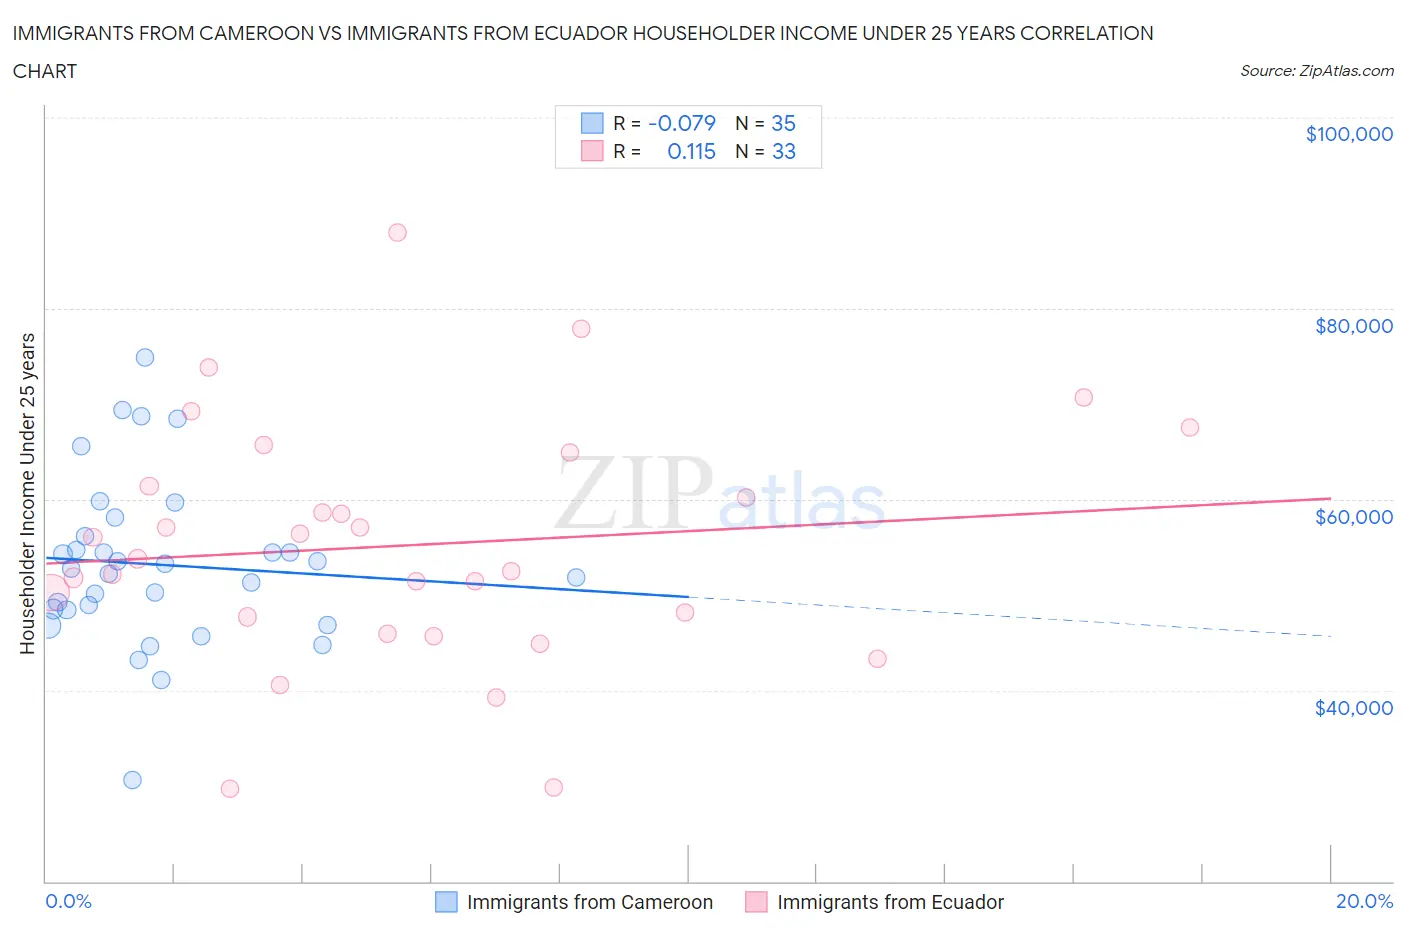 Immigrants from Cameroon vs Immigrants from Ecuador Householder Income Under 25 years